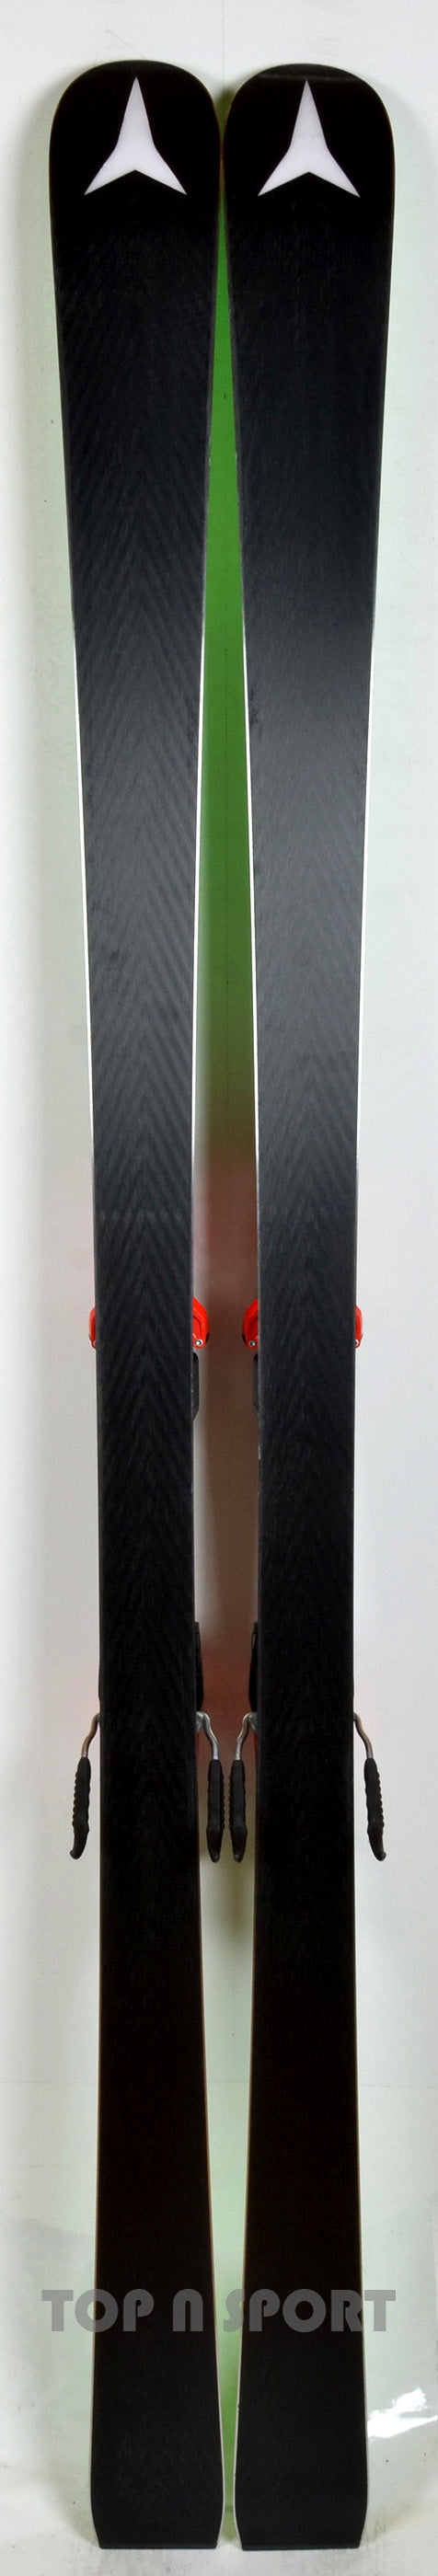 Atomic REDSTER X9 RS - TEST 2021 - skis d'occasion